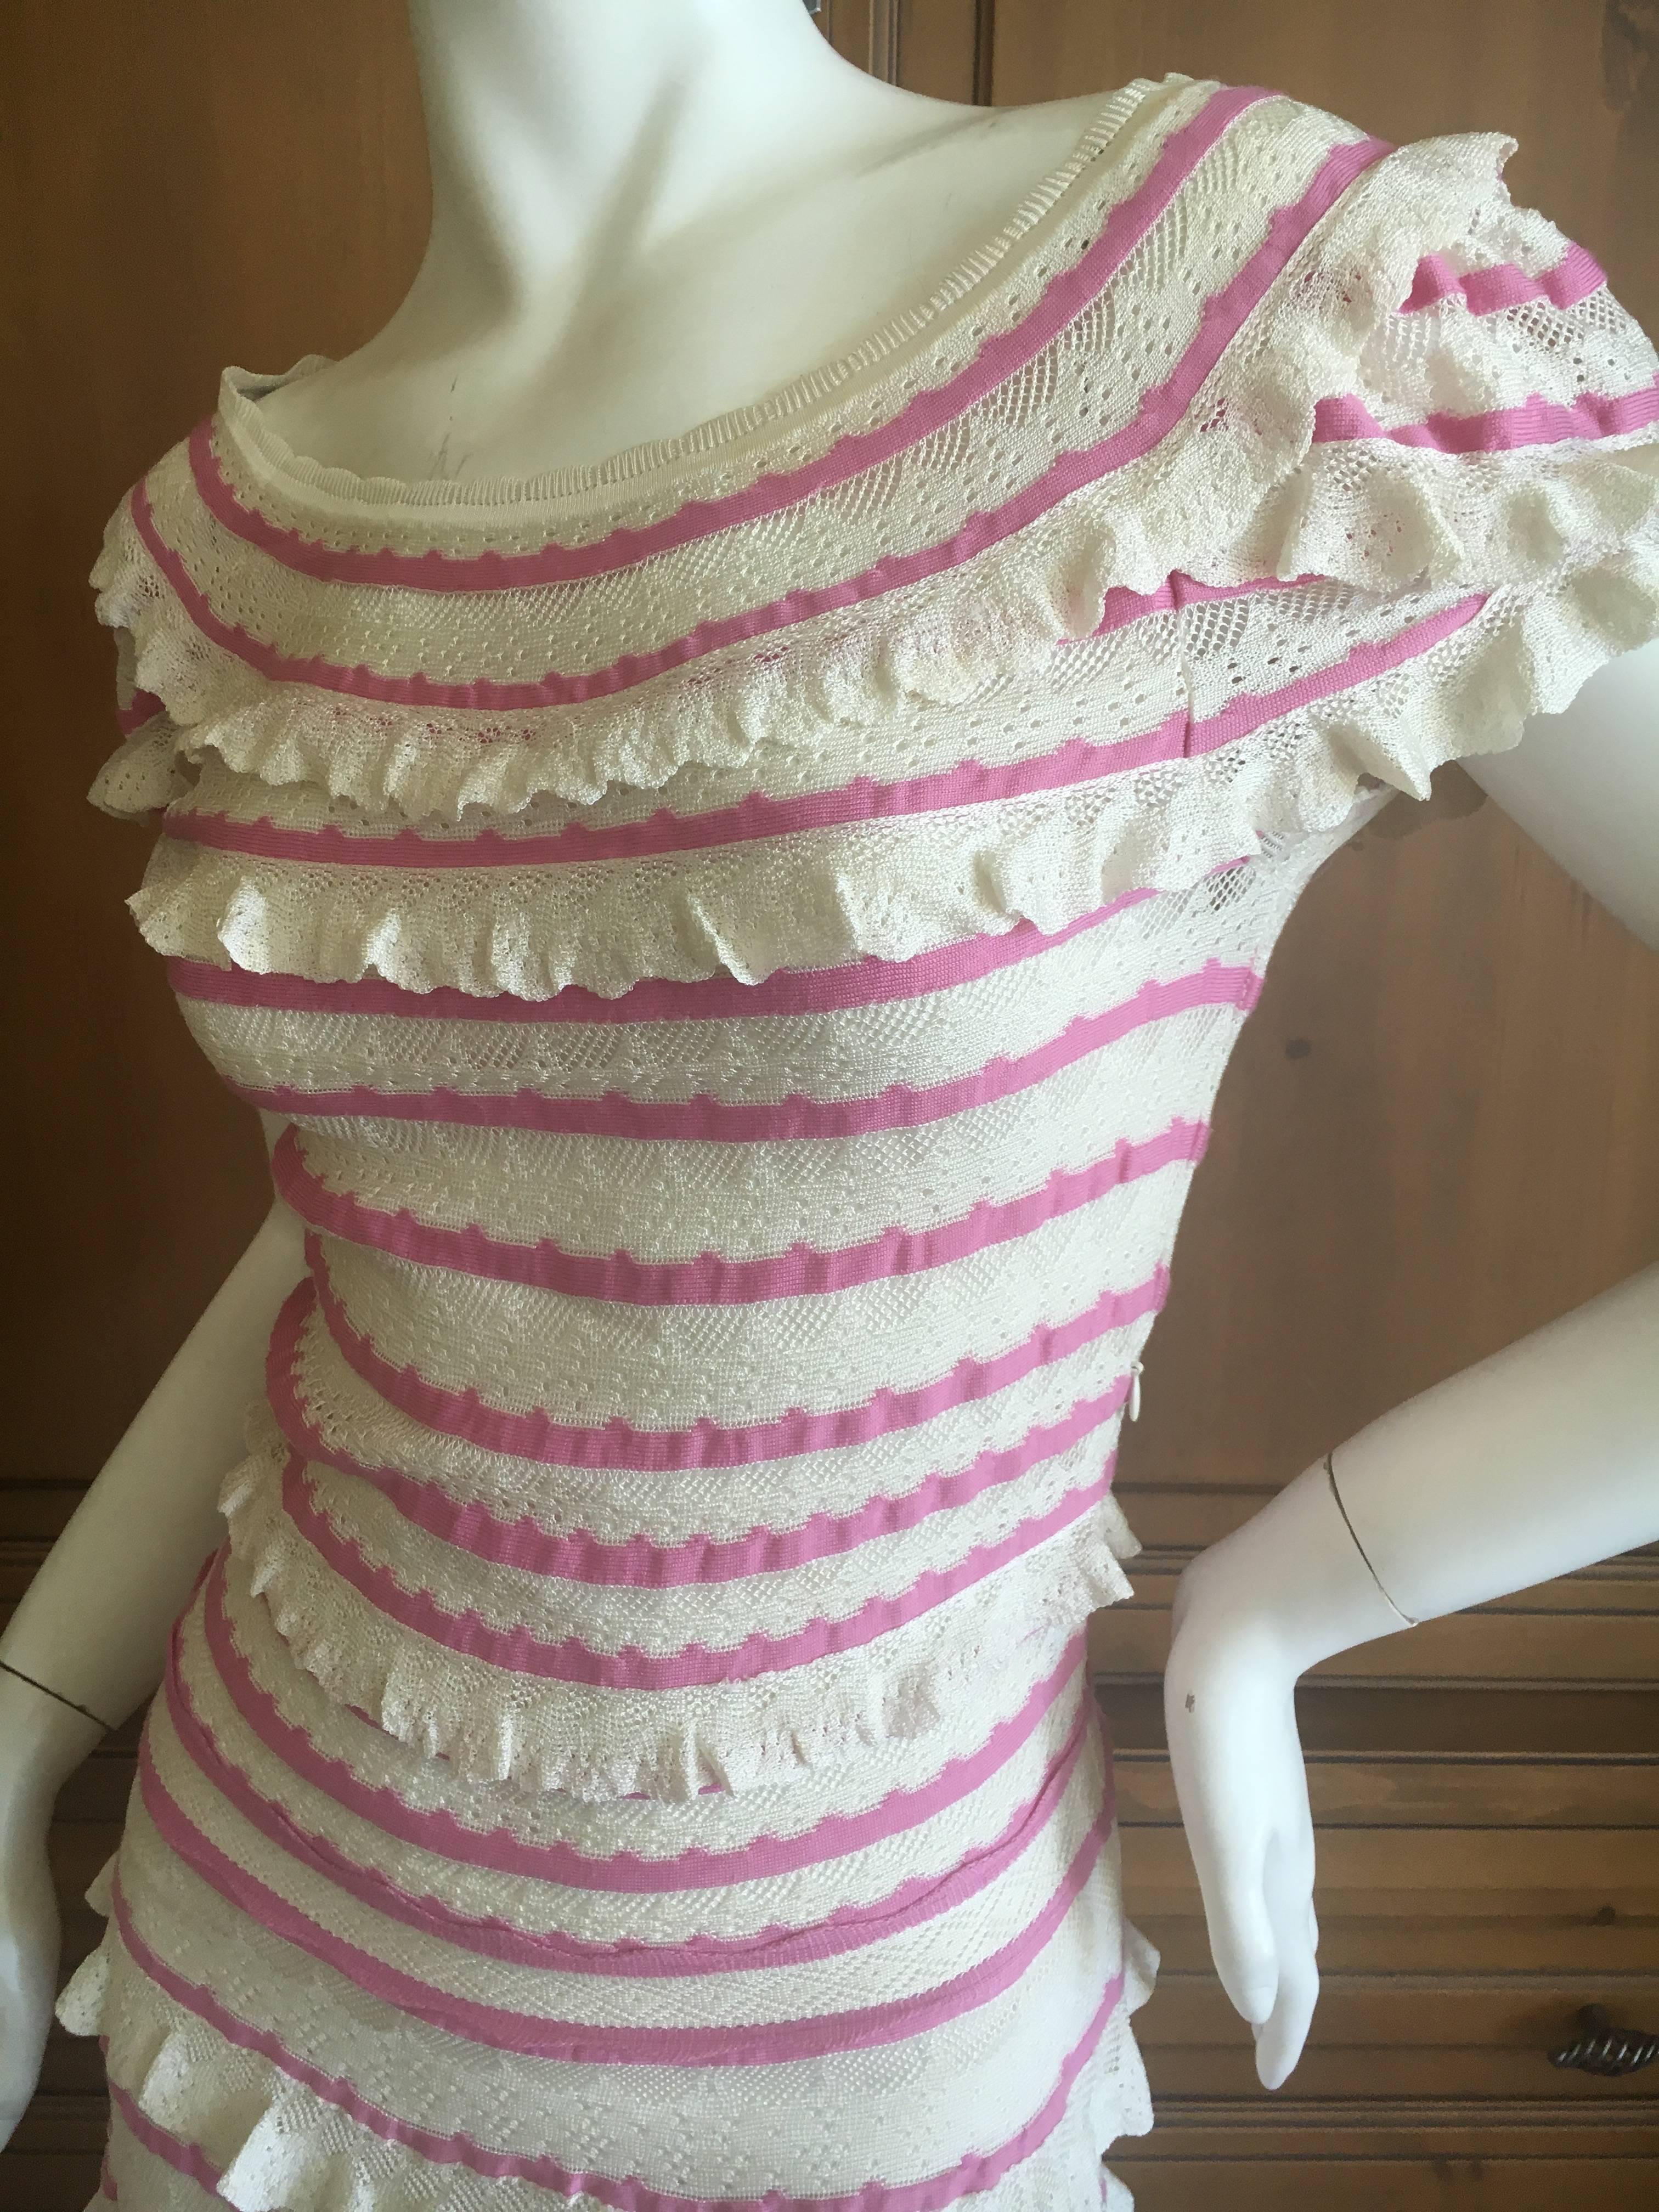 Christian Dior by John Galliano Romantic Ruffled Pink and Cream Knit Dress.
This is so much prettier than the photos show. 
Very romantic with layers of ruffles accented with pink. 
Size 38
Bust 37